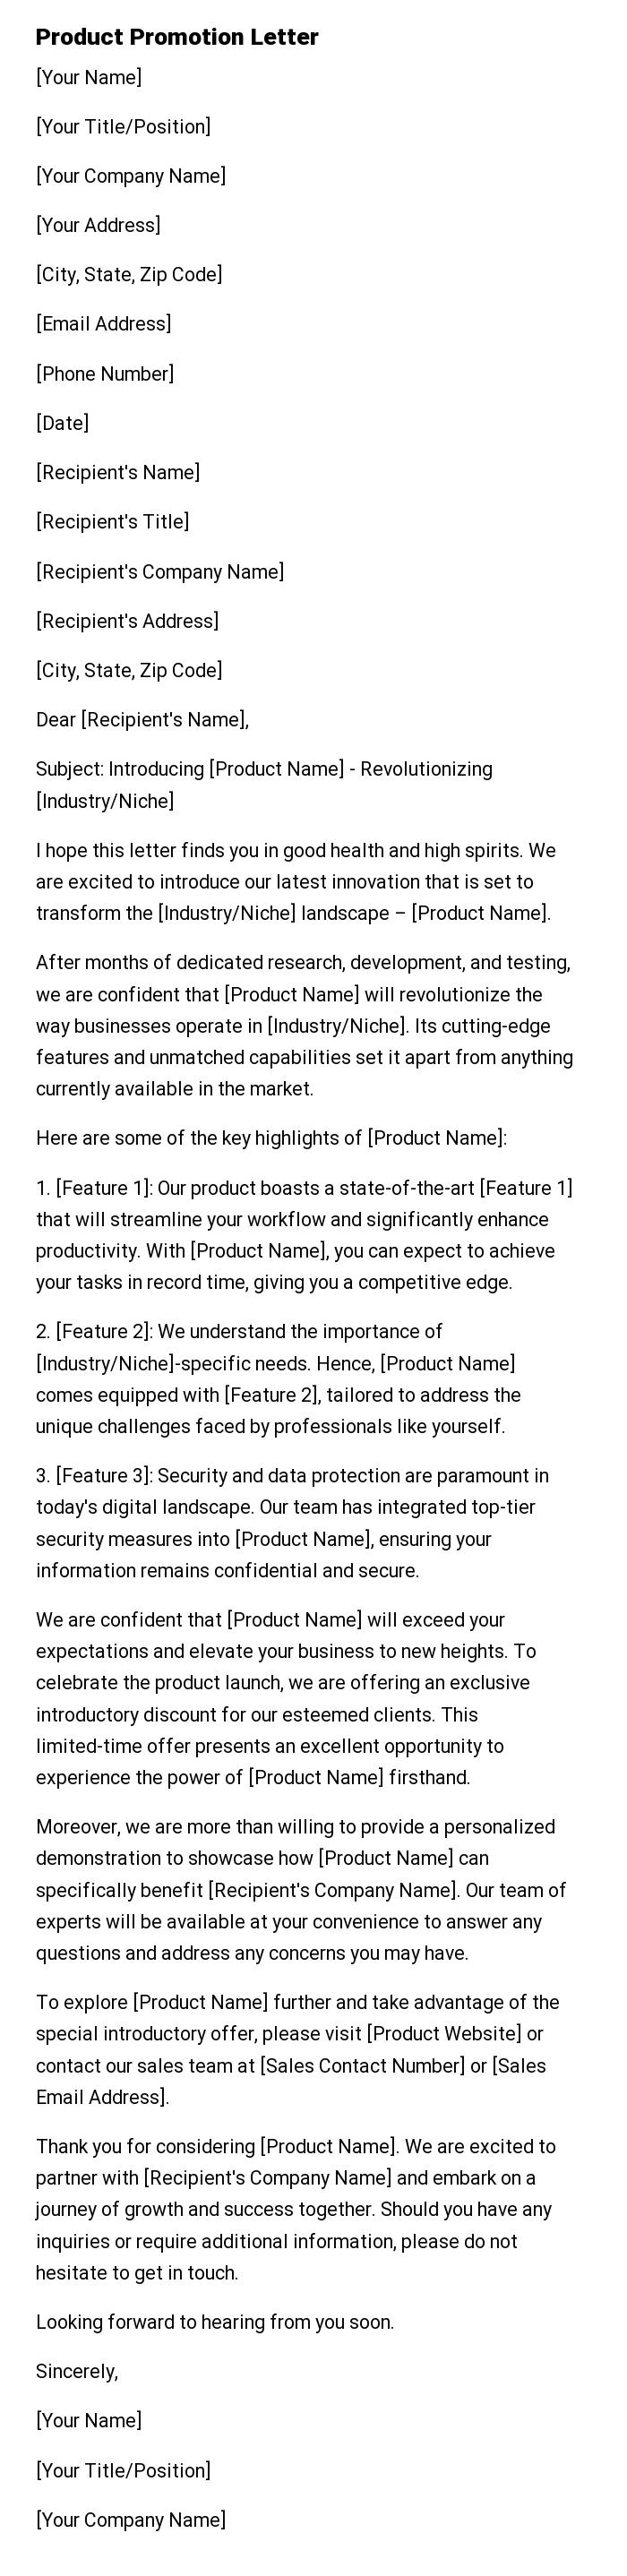 Product Promotion Letter